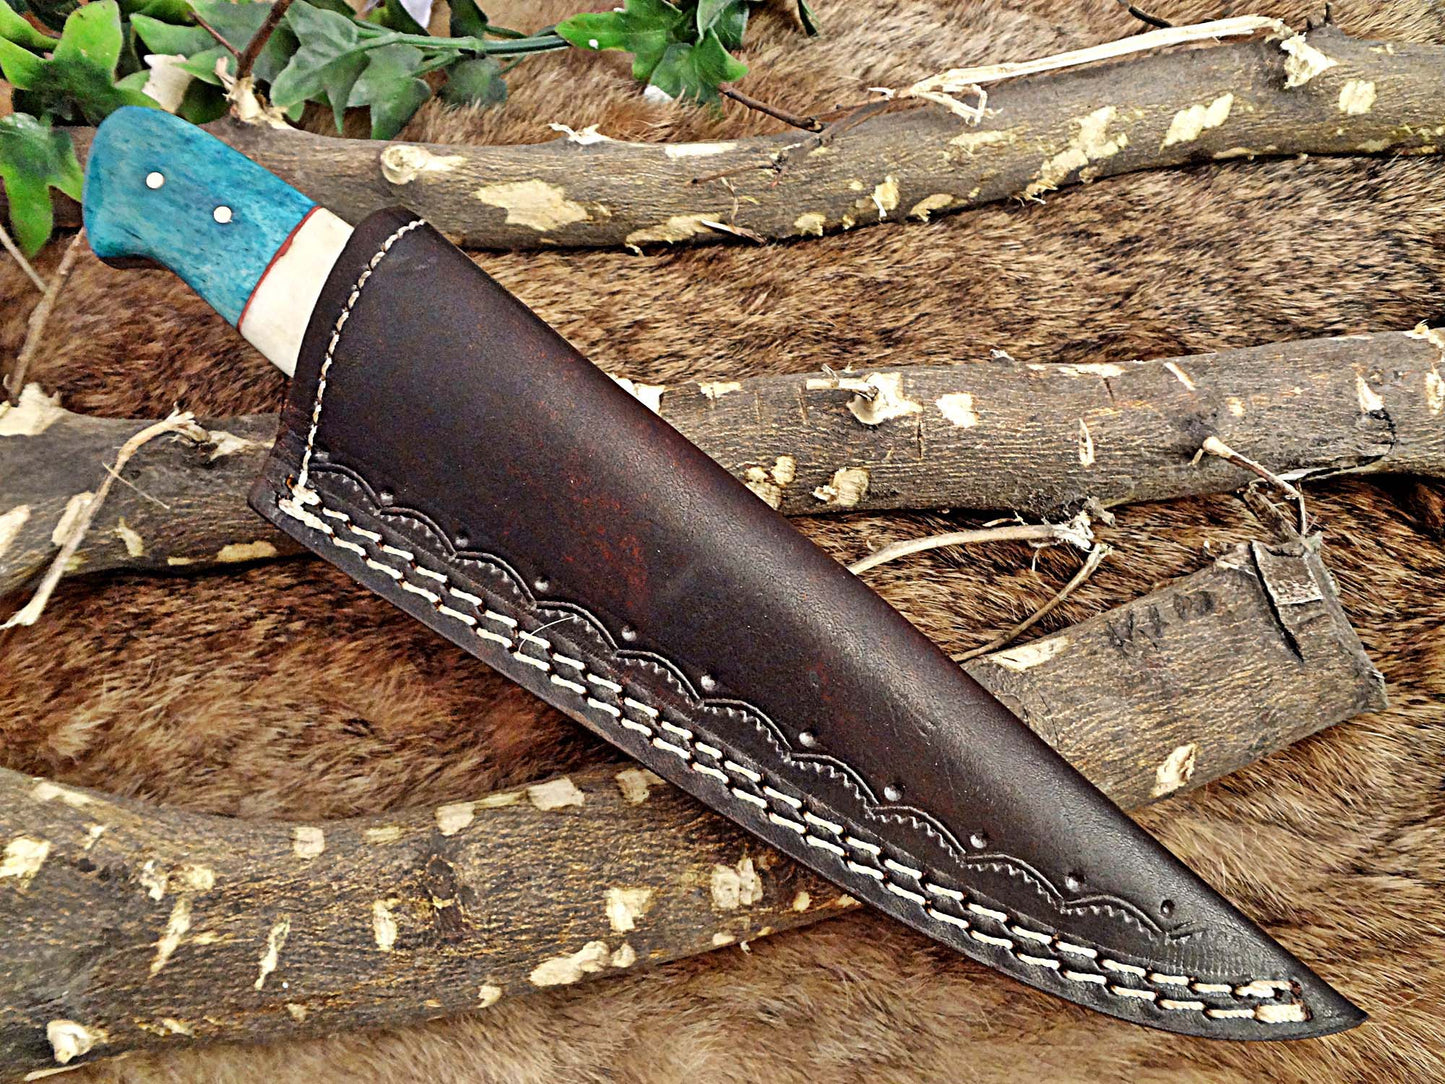 9 " Long hand forged Damascus steel full tang skinning Knife, Natural camel Bone and Buffalo Horn scale with Bolster Cow hide Leather sheath